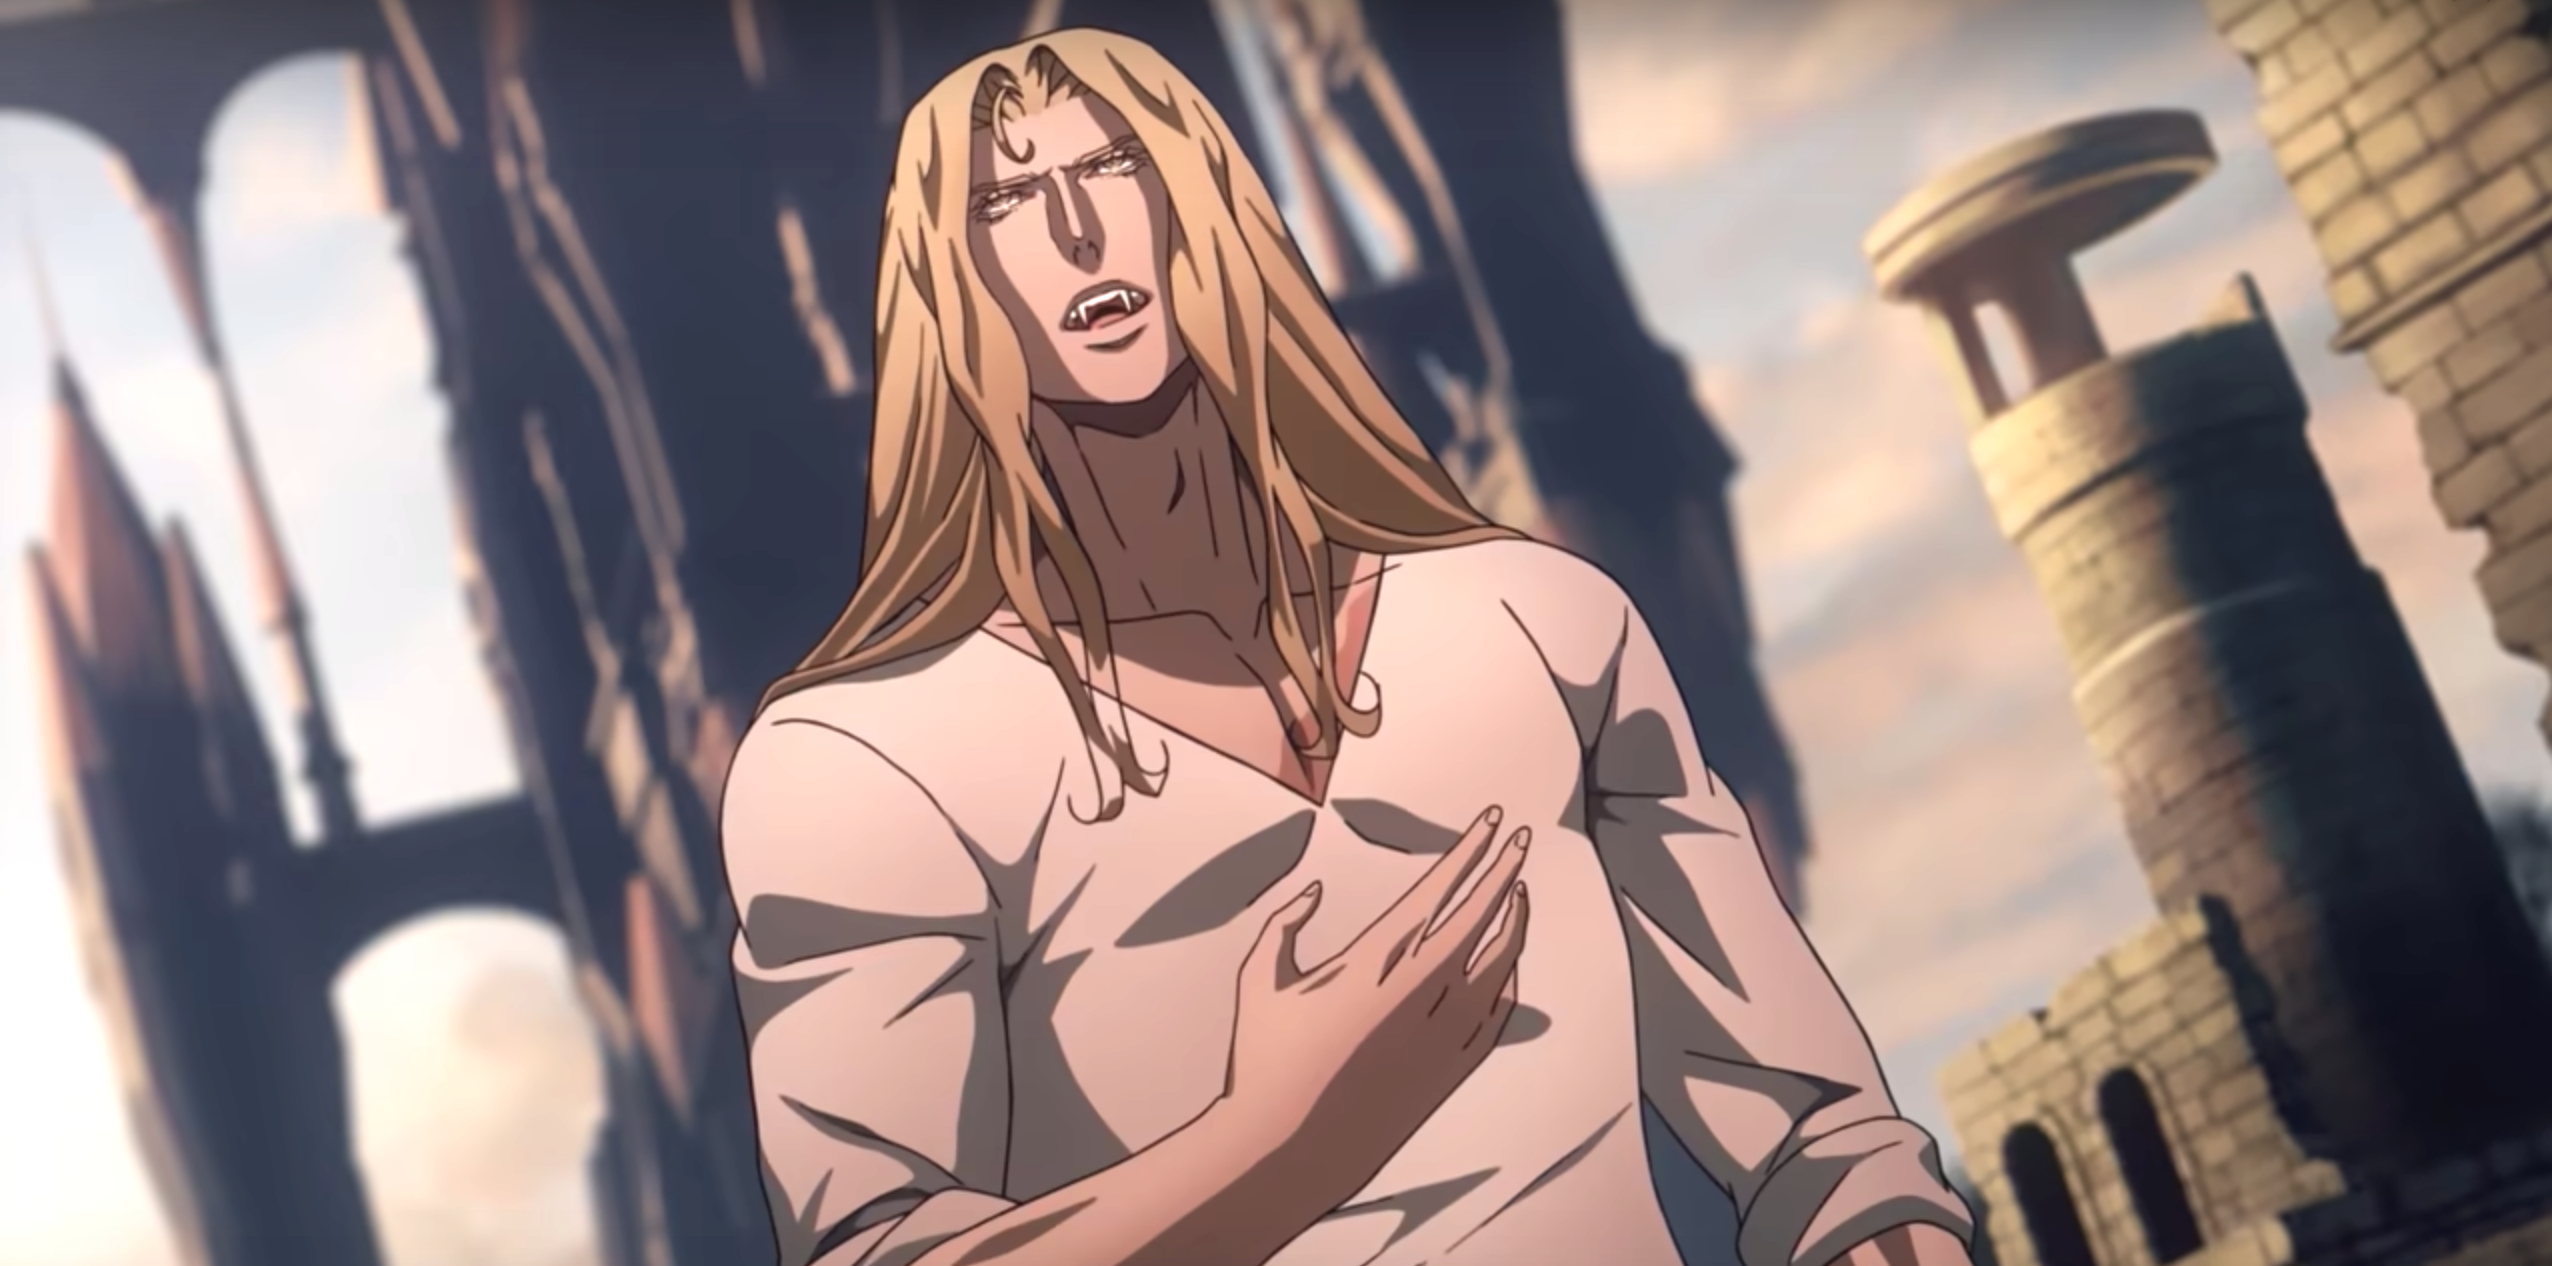 Castlevania To End With Season 4 As Netflix Eyes New Series In Same  Universe  Deadline